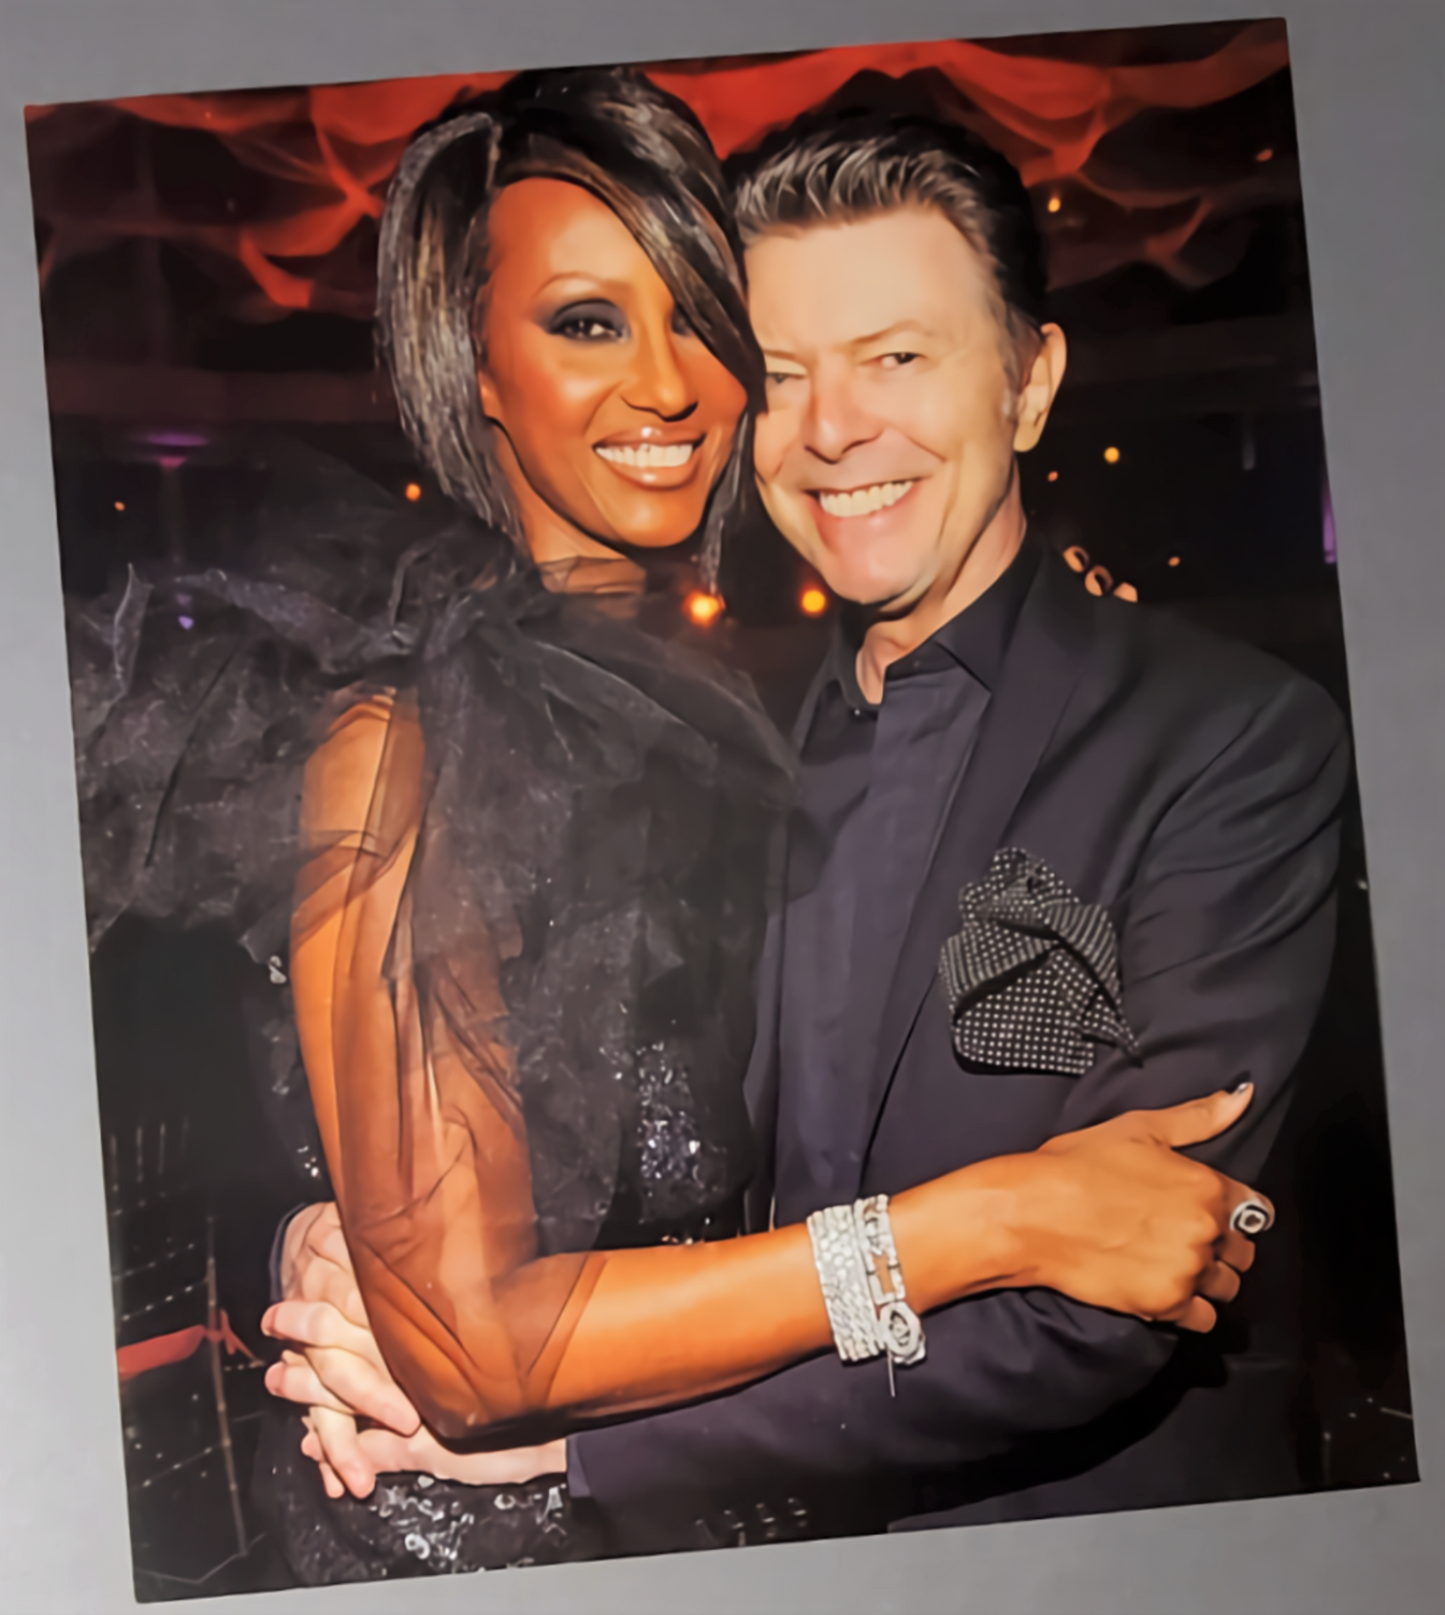 David Bowie Iman Art Photograph Available In AREA51GALLERY New Orleans 